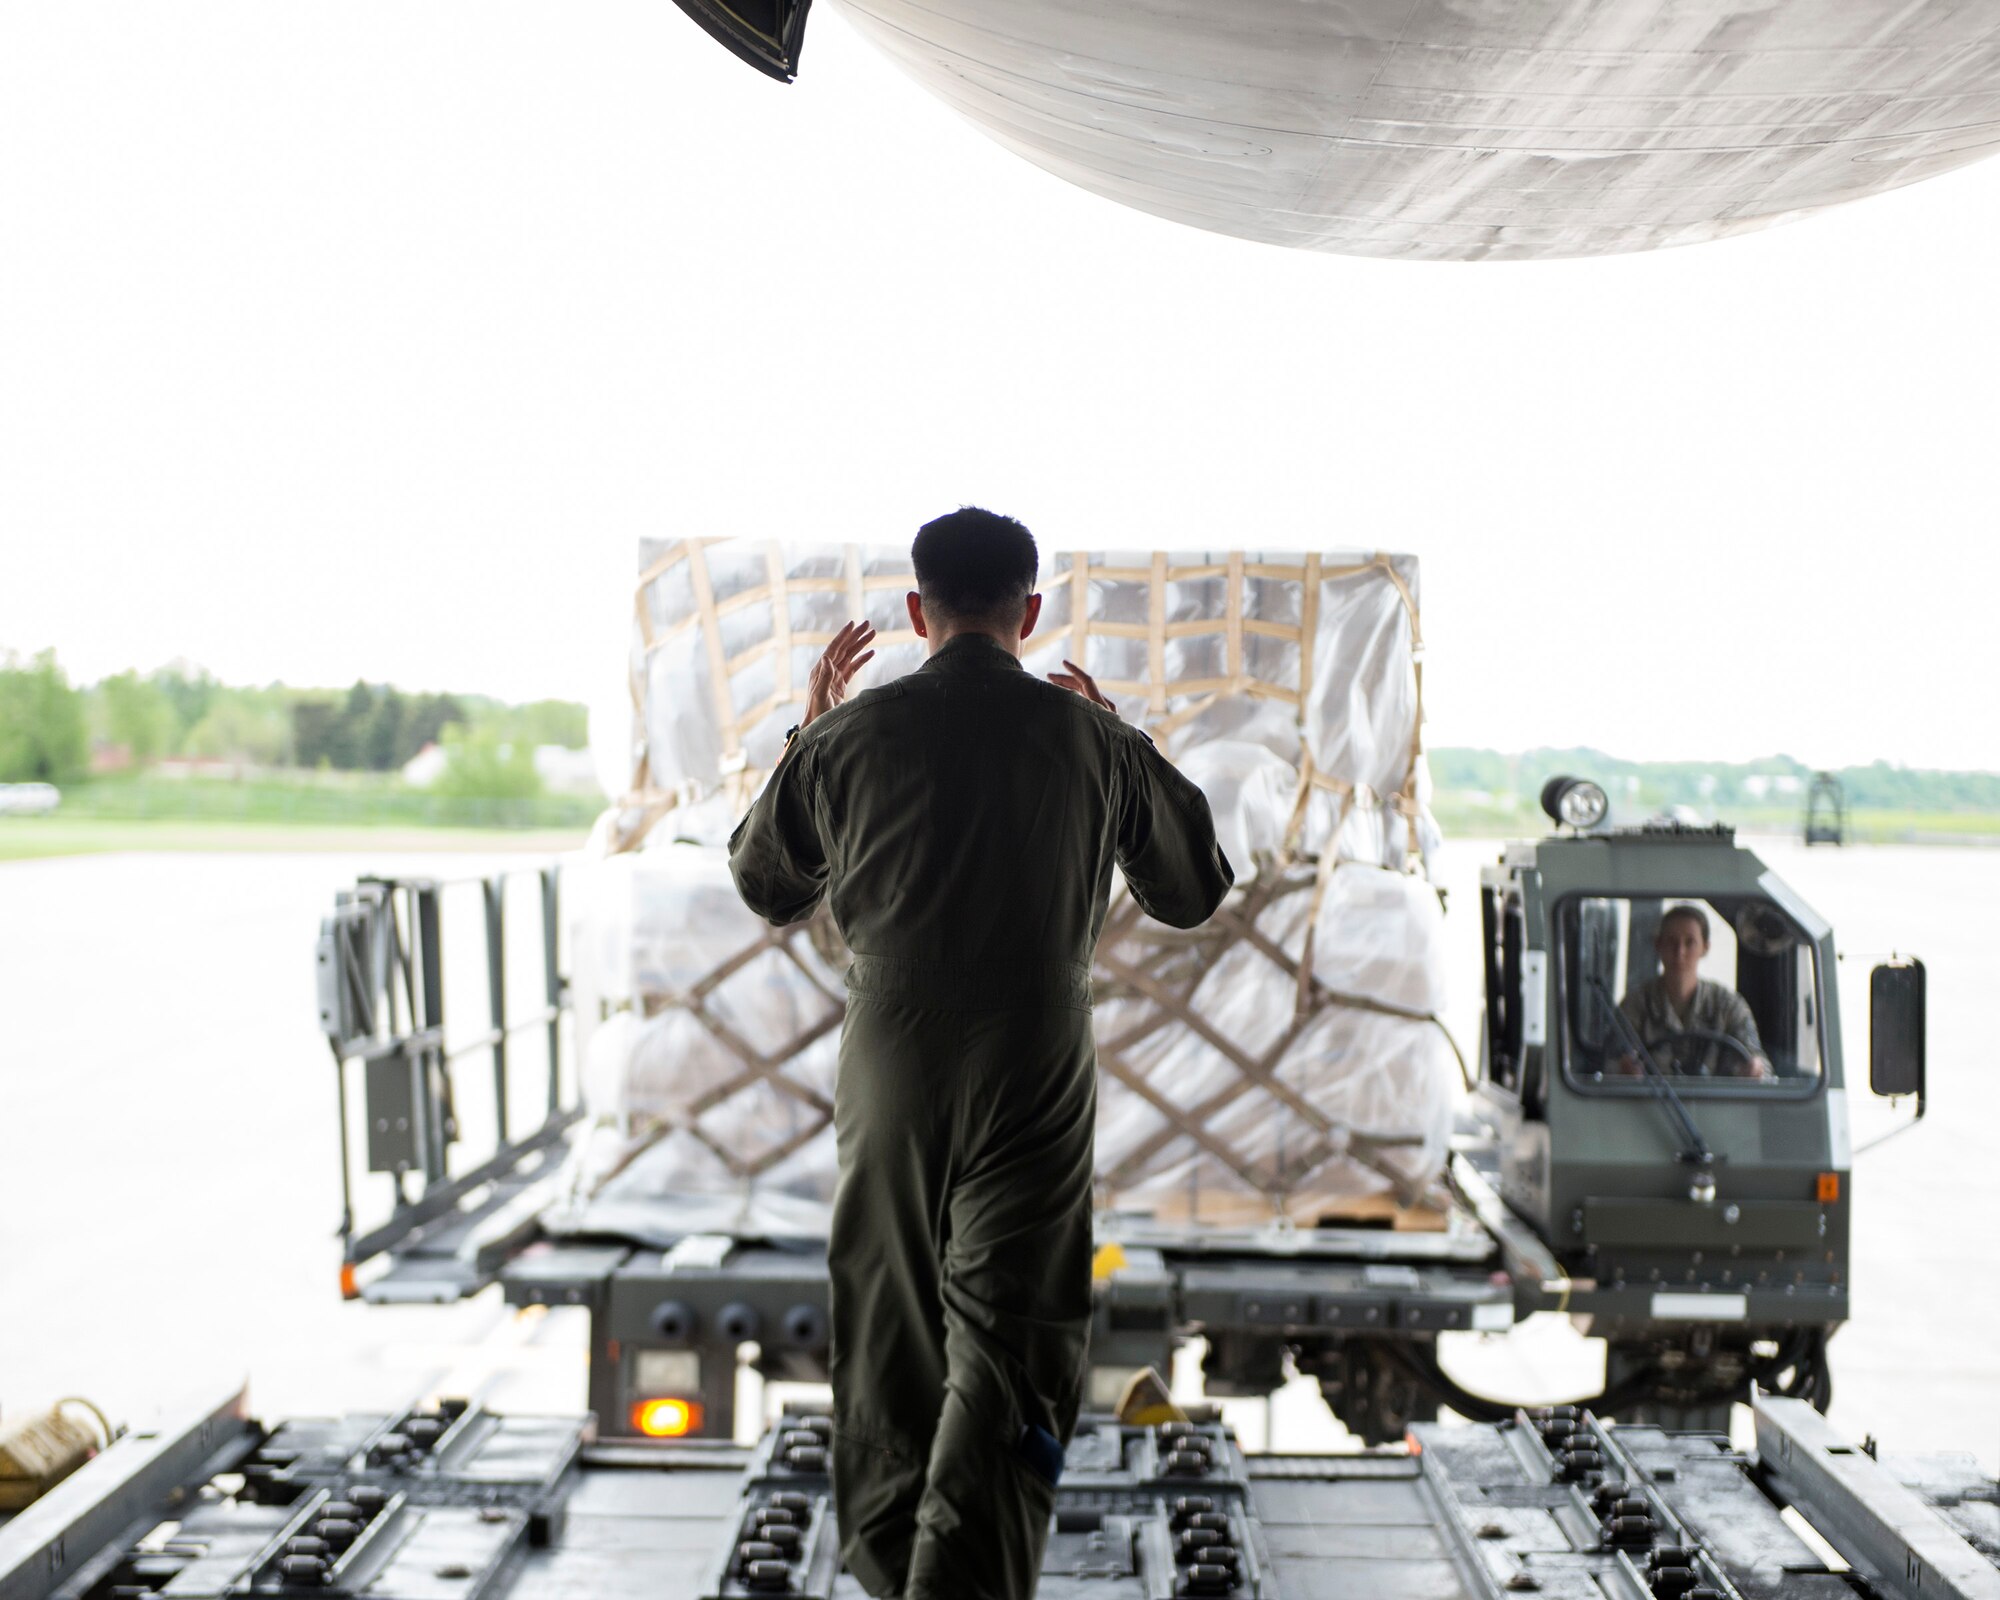 A loadmaster from the 312th Airlift Squadron guides an Airman from the 133rd Small Air Terminal to the C-5 Galaxy in St. Paul, Minn., May 22, 2019.